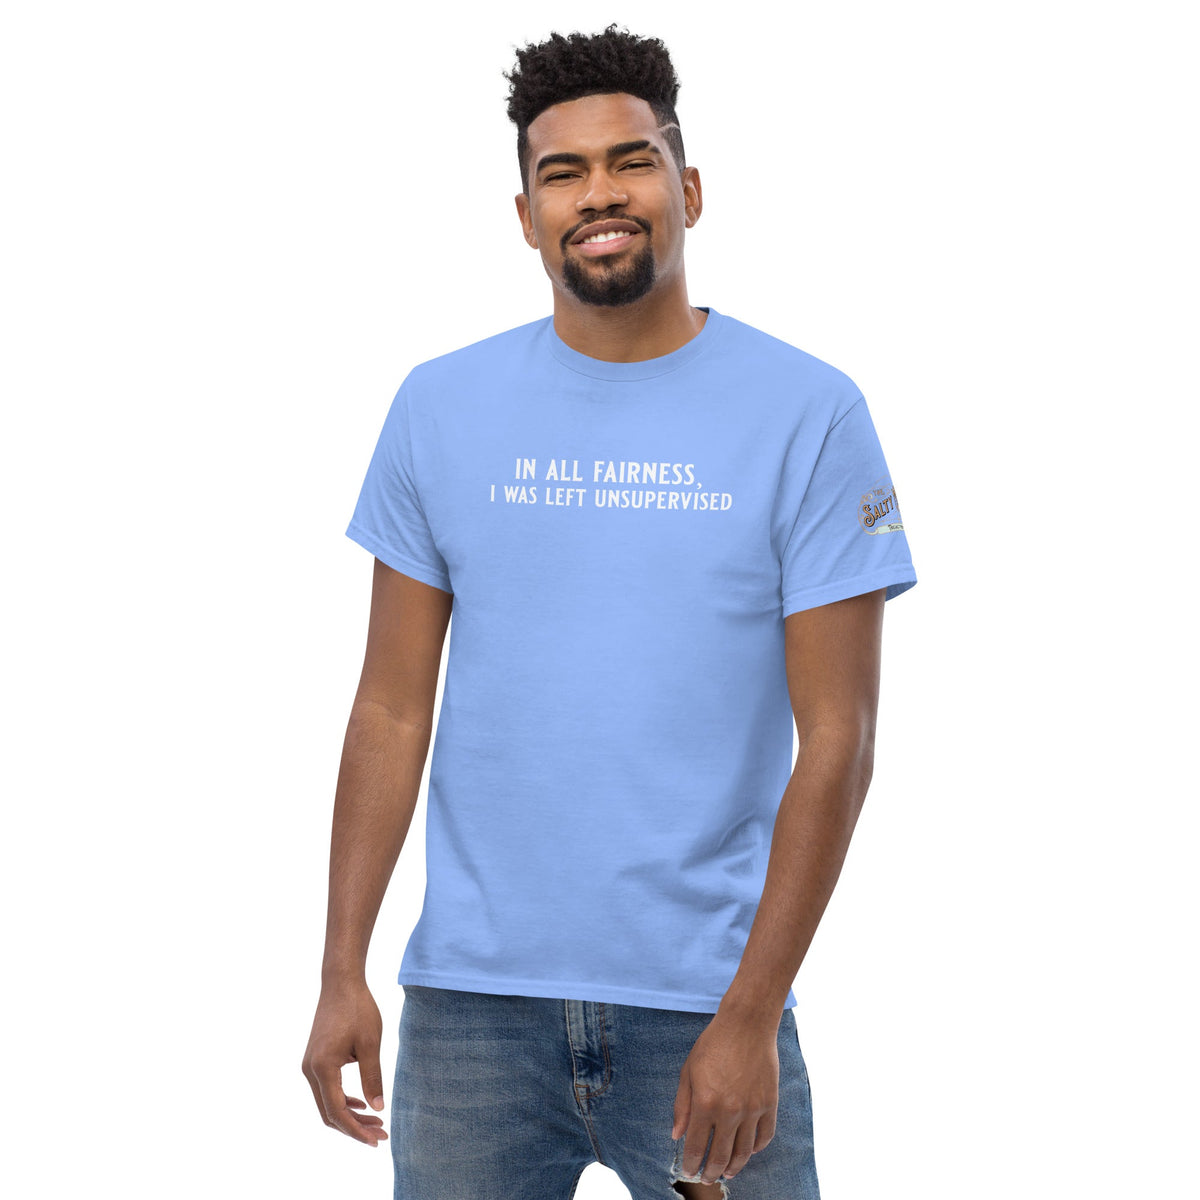 In all fairness Men's classic tee - Salty Medic Clothing Co.